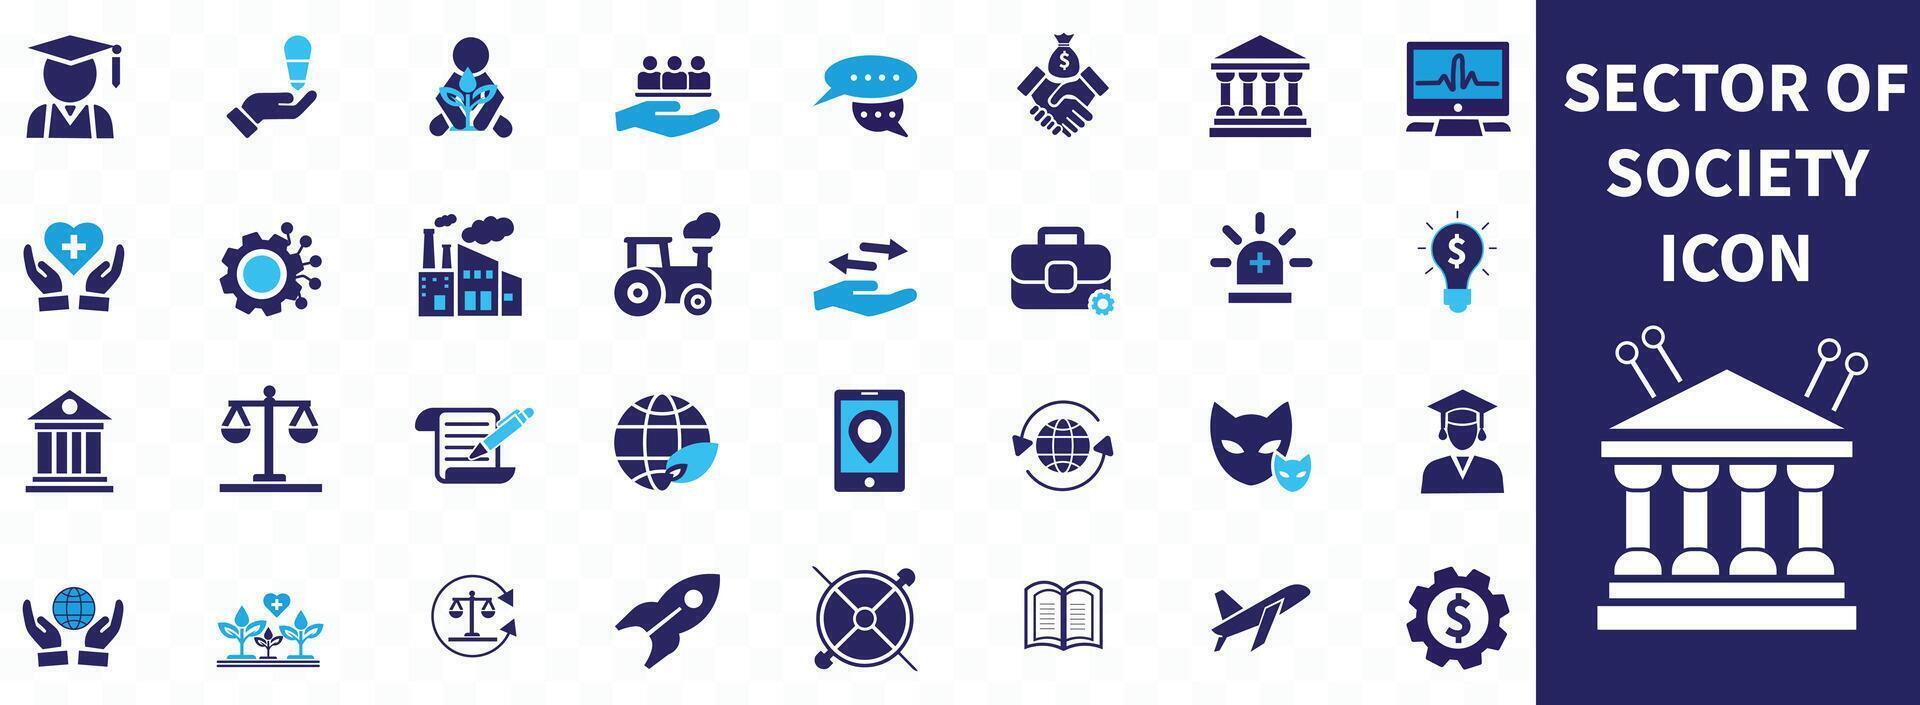 Sector of society icon set. Containing agriculture, education, healthcare, energy, technology, transportation, arts, justice and more. Solid icons collection. vector